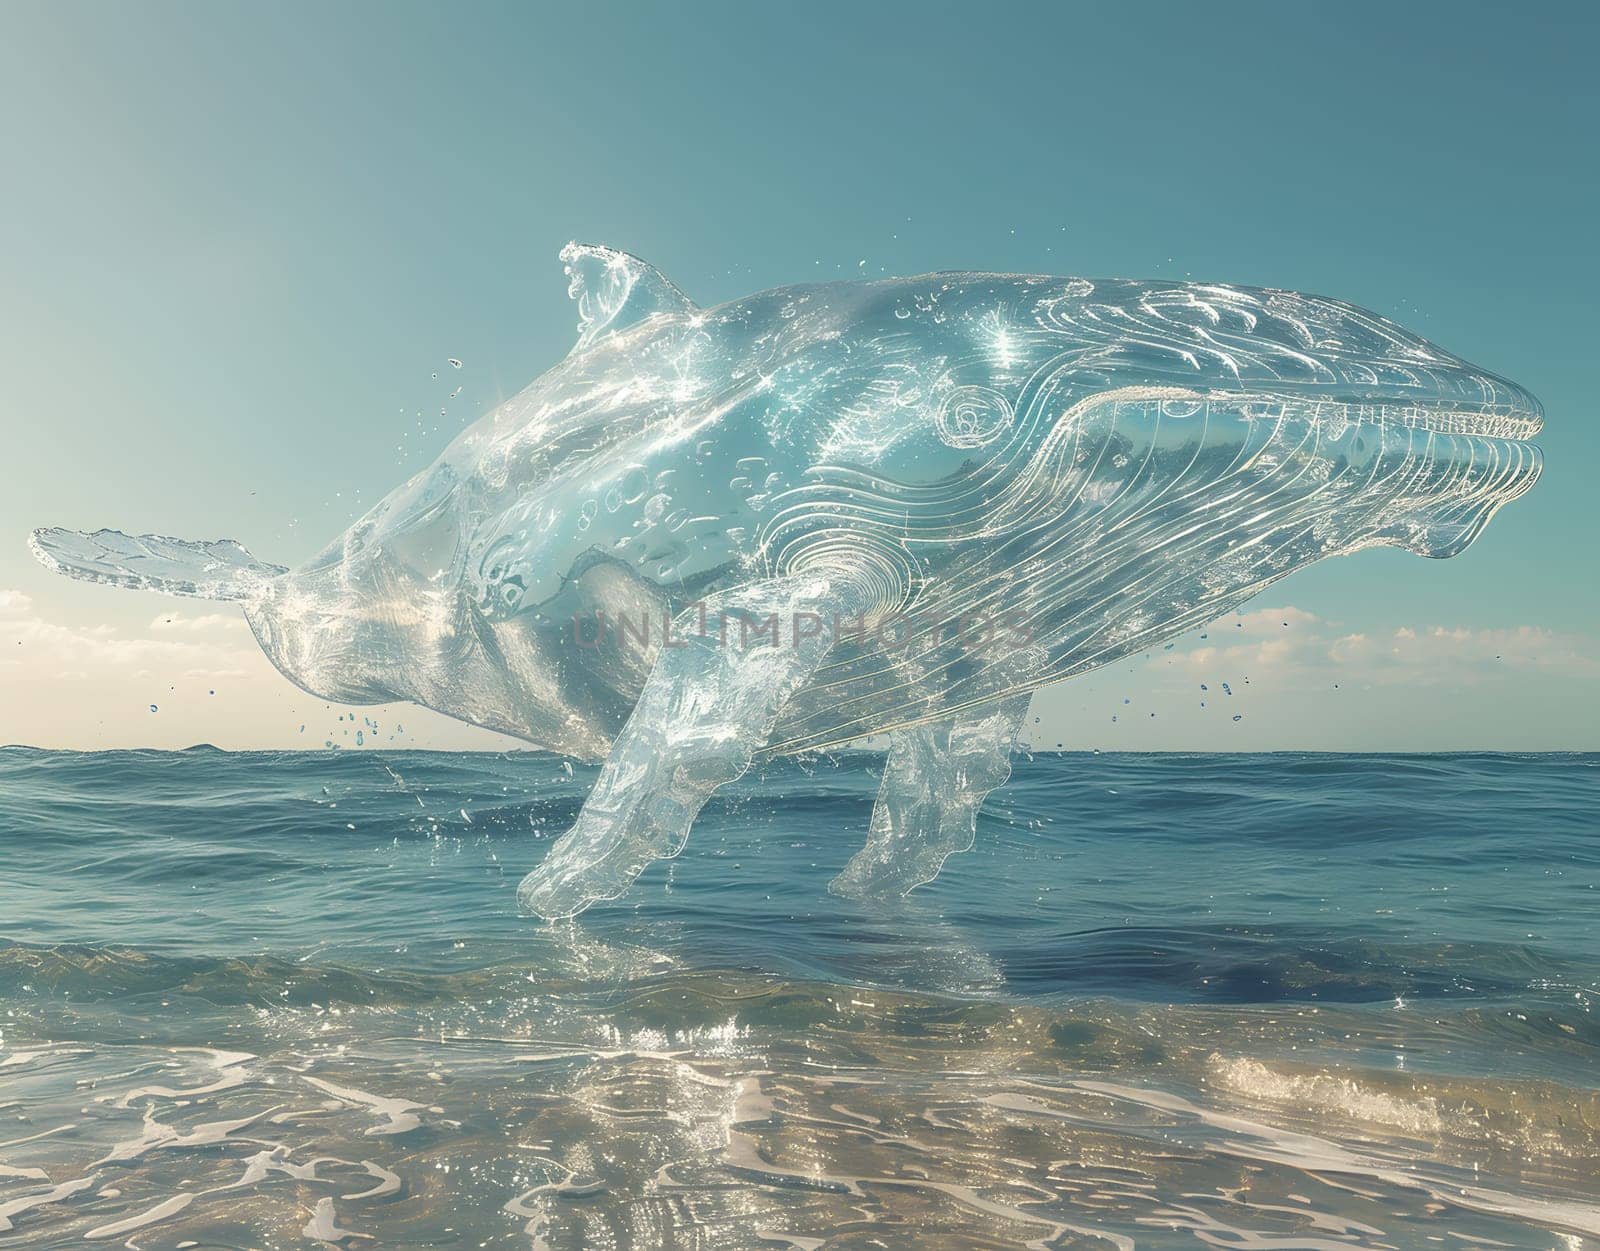 A majestic whale sculpture made entirely of water gracefully swims through the ocean, blending with the liquid surroundings and creating a stunning underwater art display